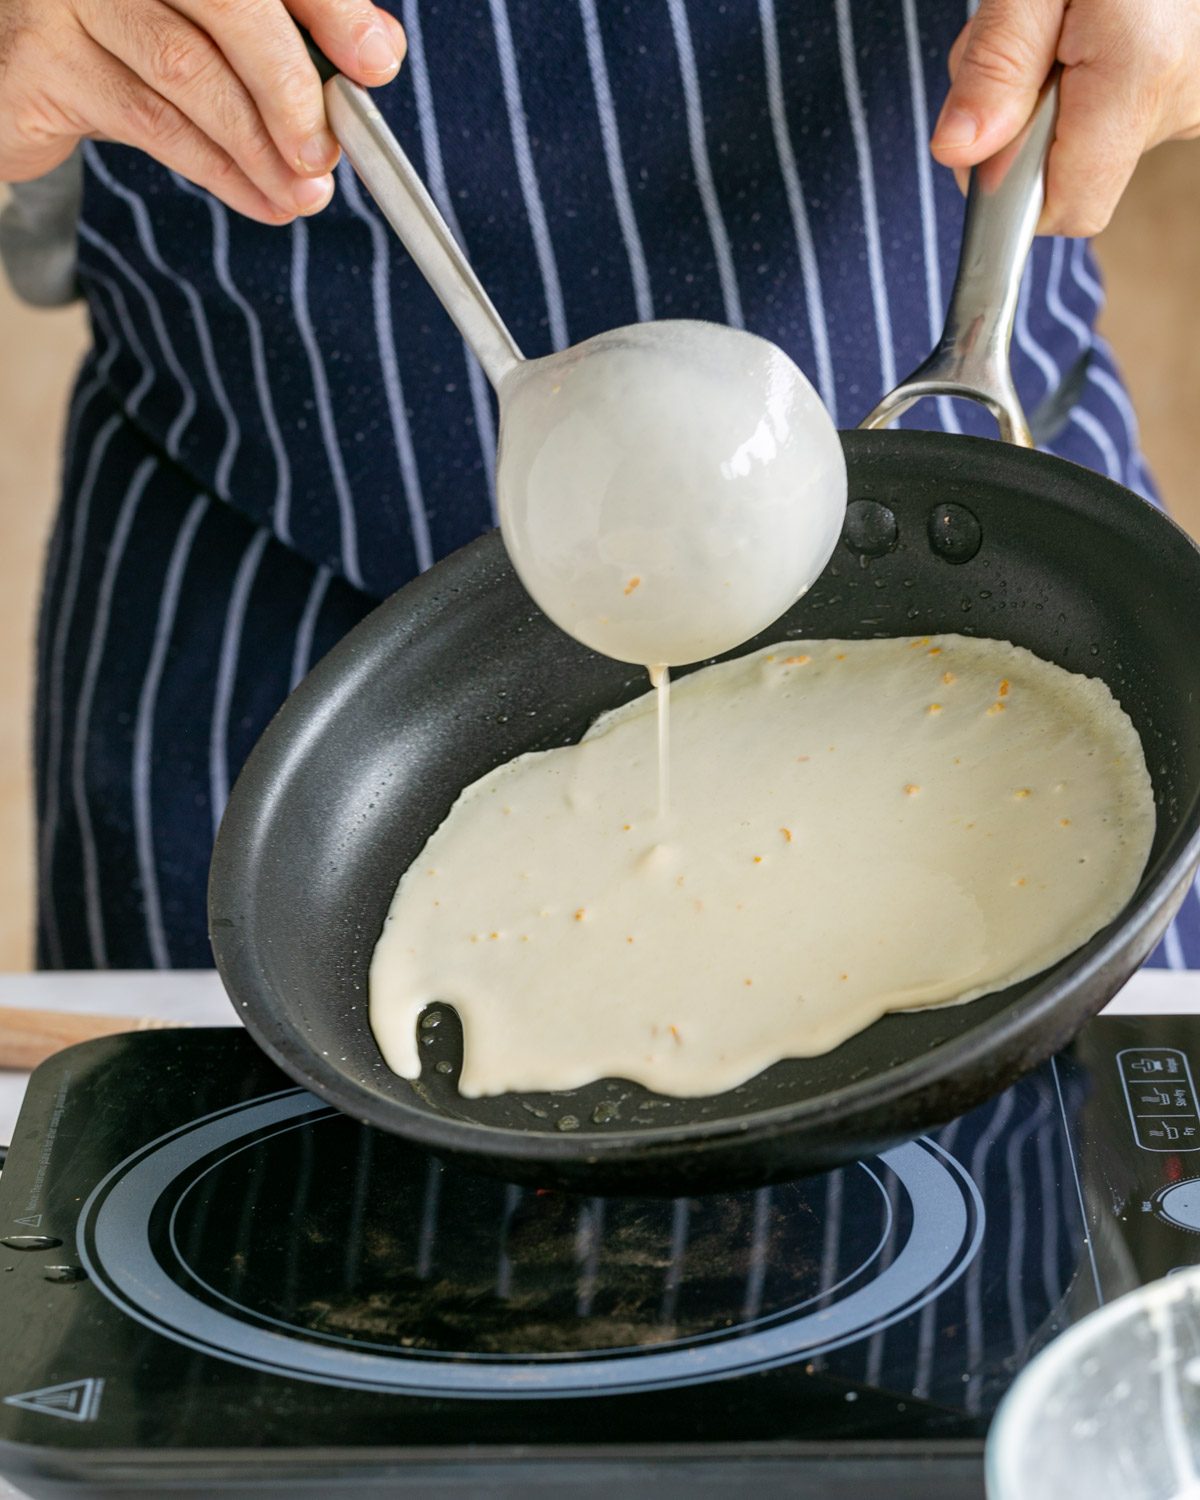 Pouring crepe batter with a ladle to the hot pan